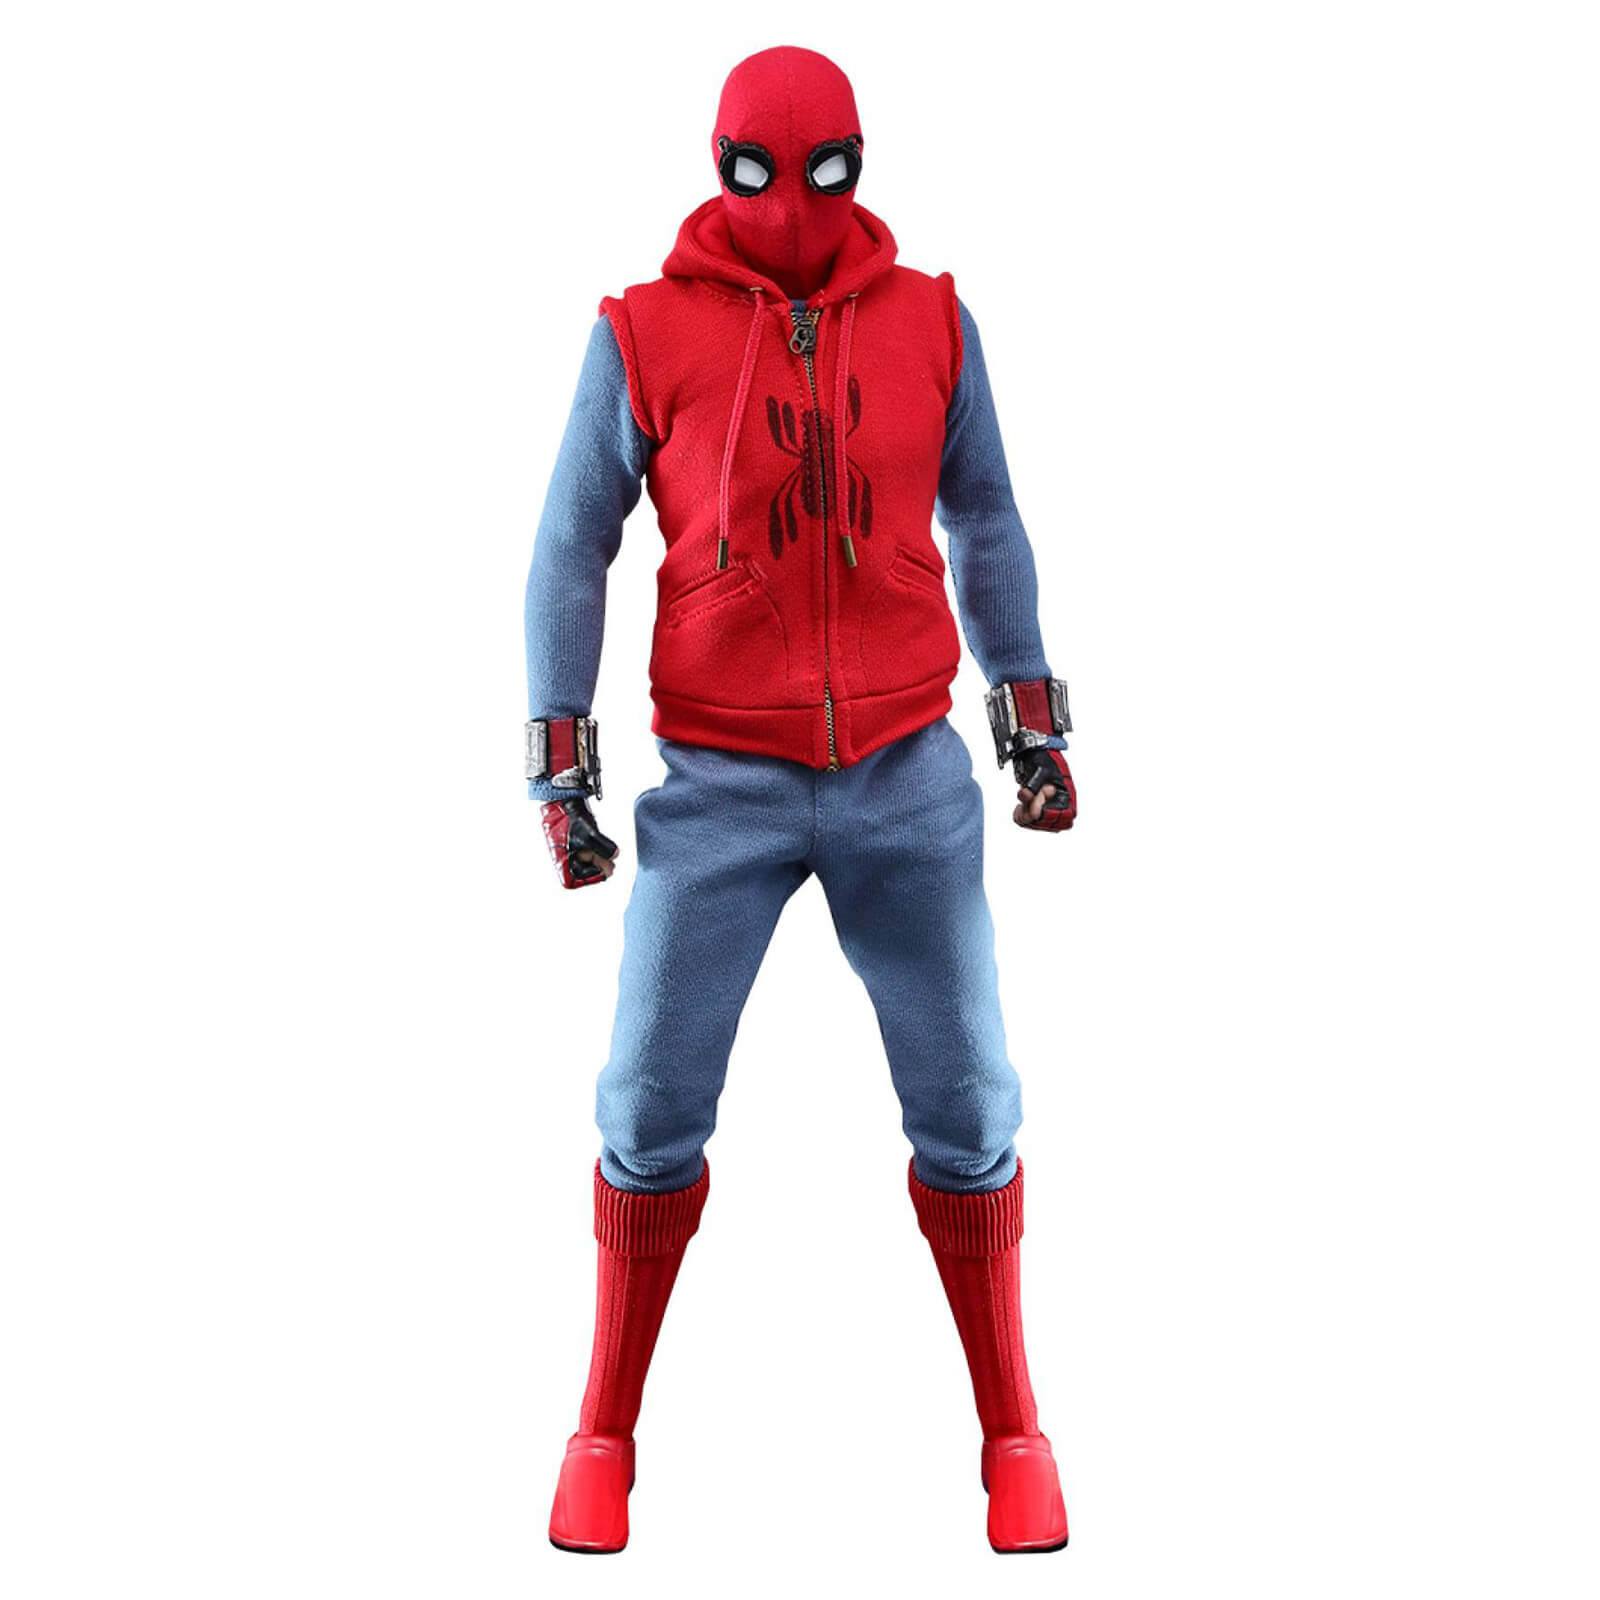 Hot Toys Spider-Man: Far From Home Movie Masterpiece Action Figure 1/6 Spider-Man (Homemade Suit) 29cm